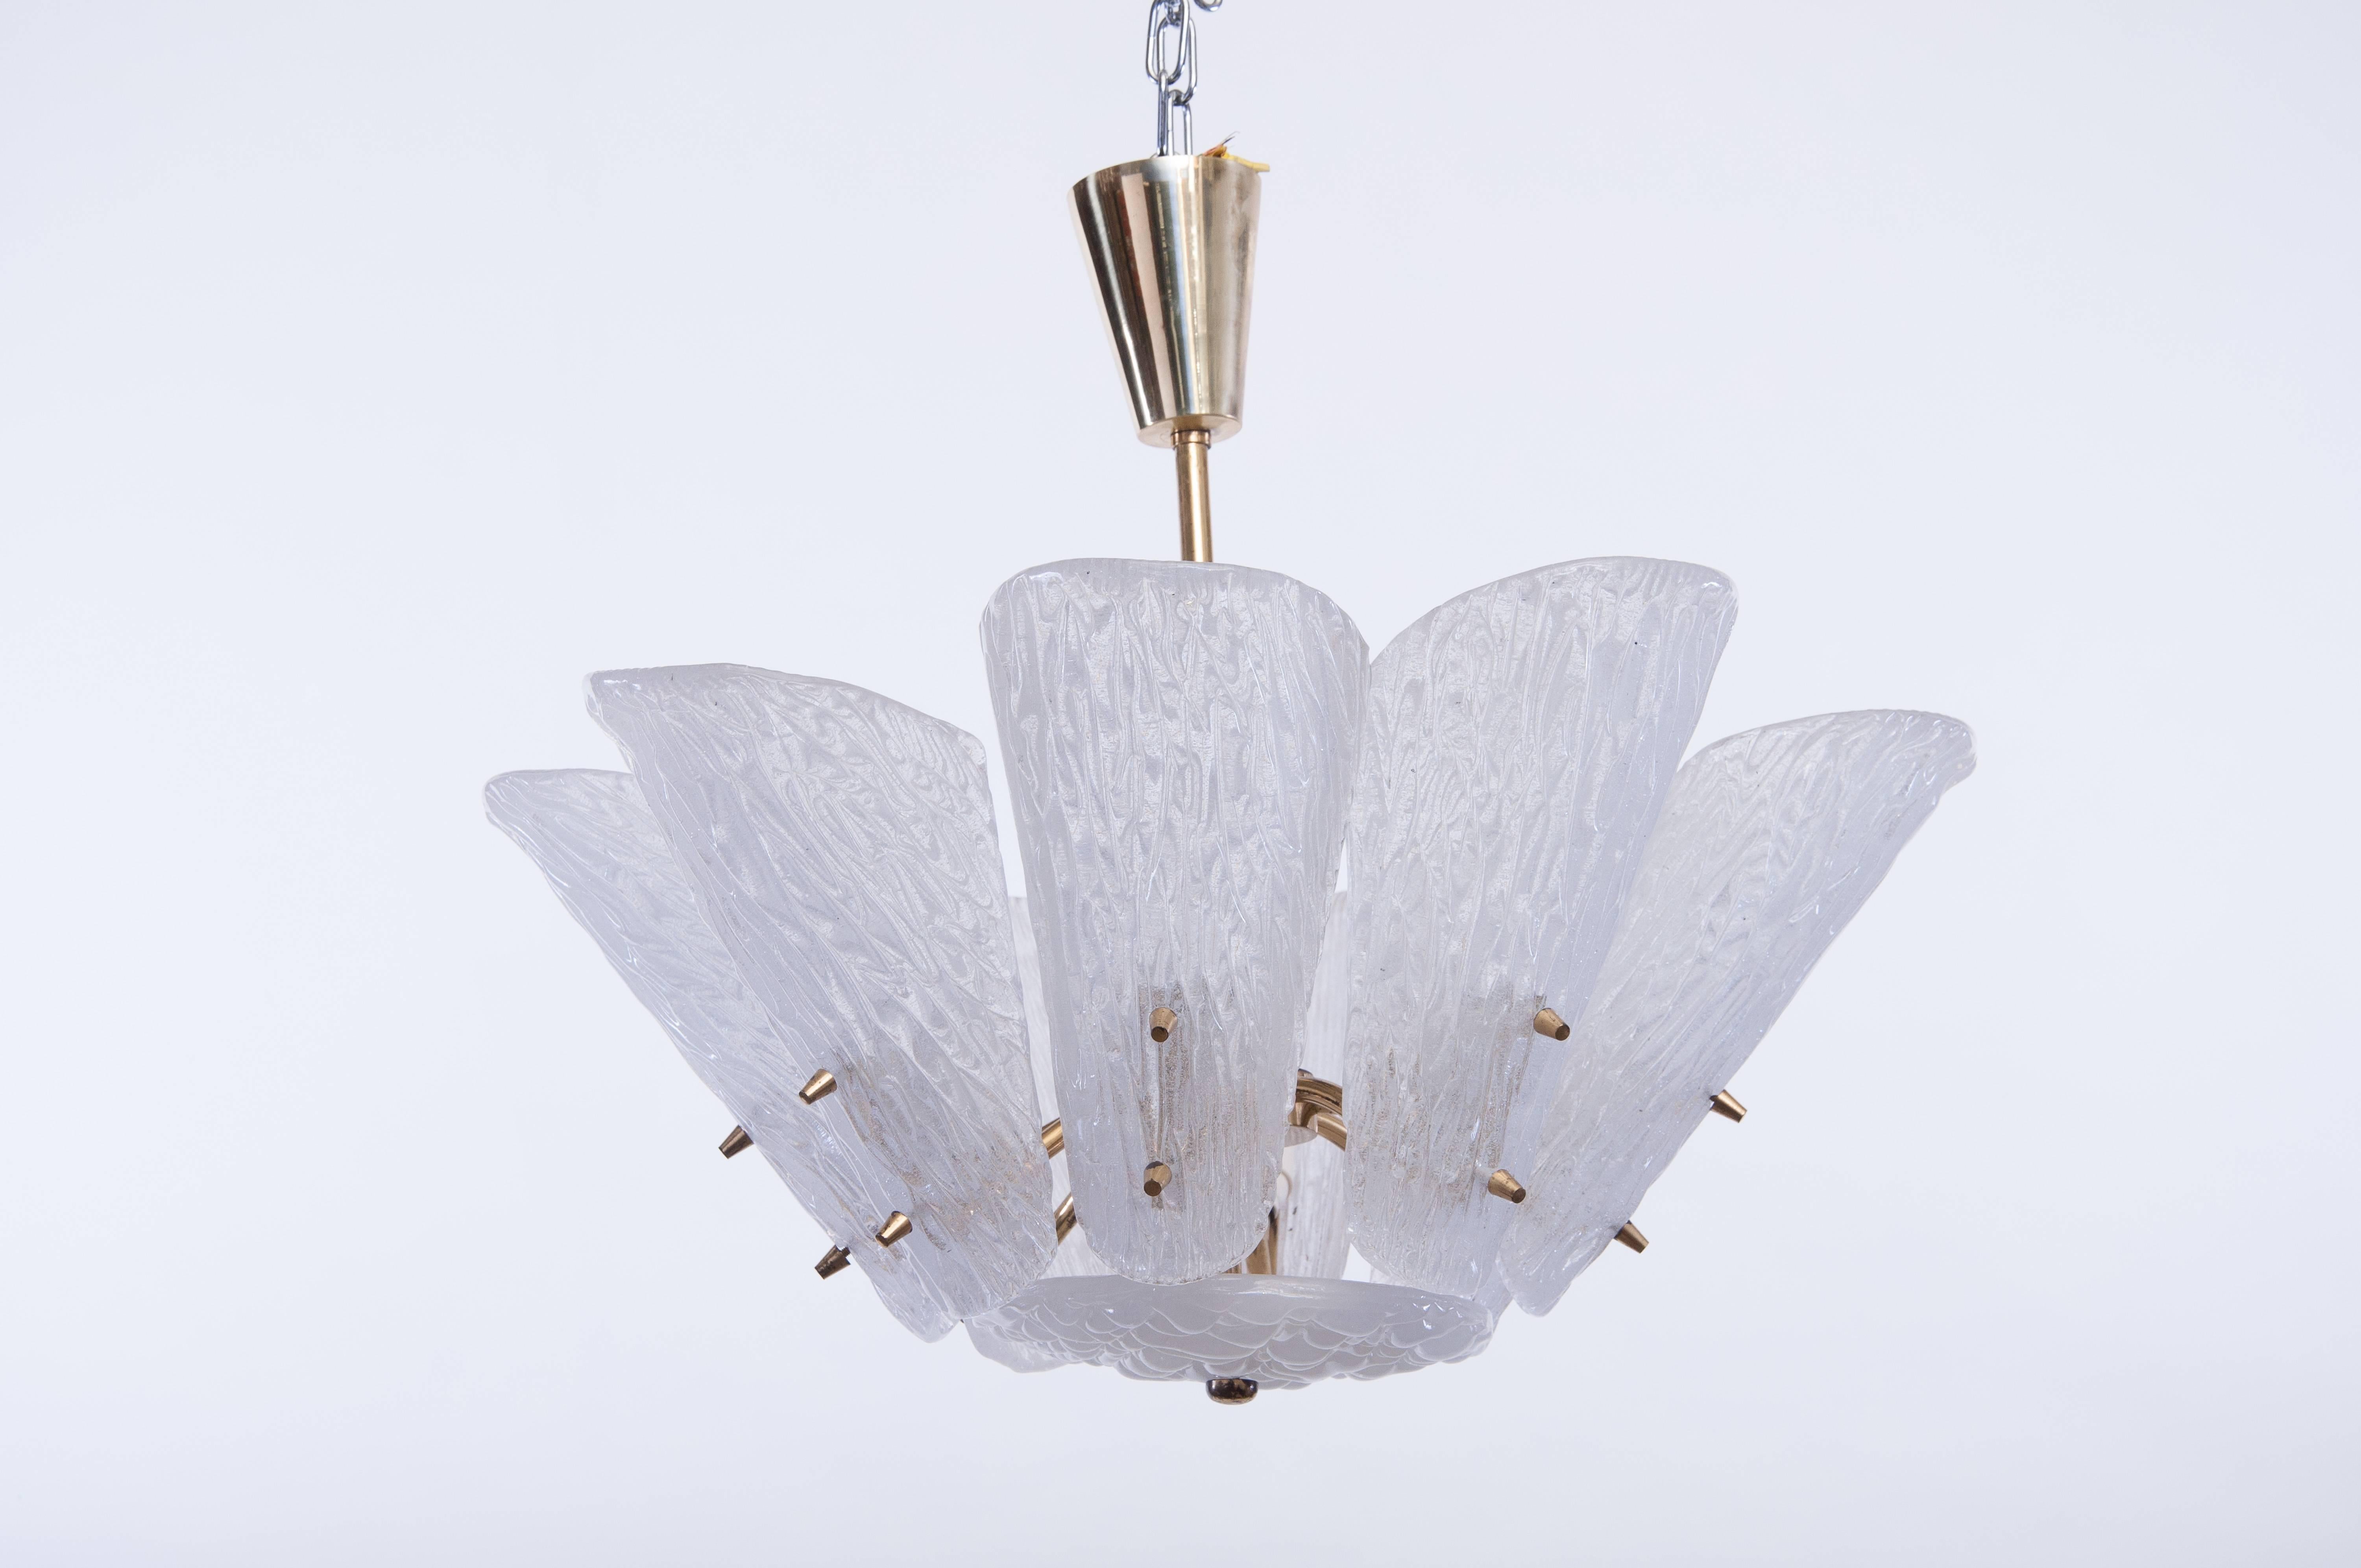 One large Viennese midcentury textured milky colored glass and brass pendant lights or chandeliers by J. T. Kalmar, Austria, manufactured in the 1950s. Each light fixture as an impressive and handmade piece. 
Each fixture features nine arms with